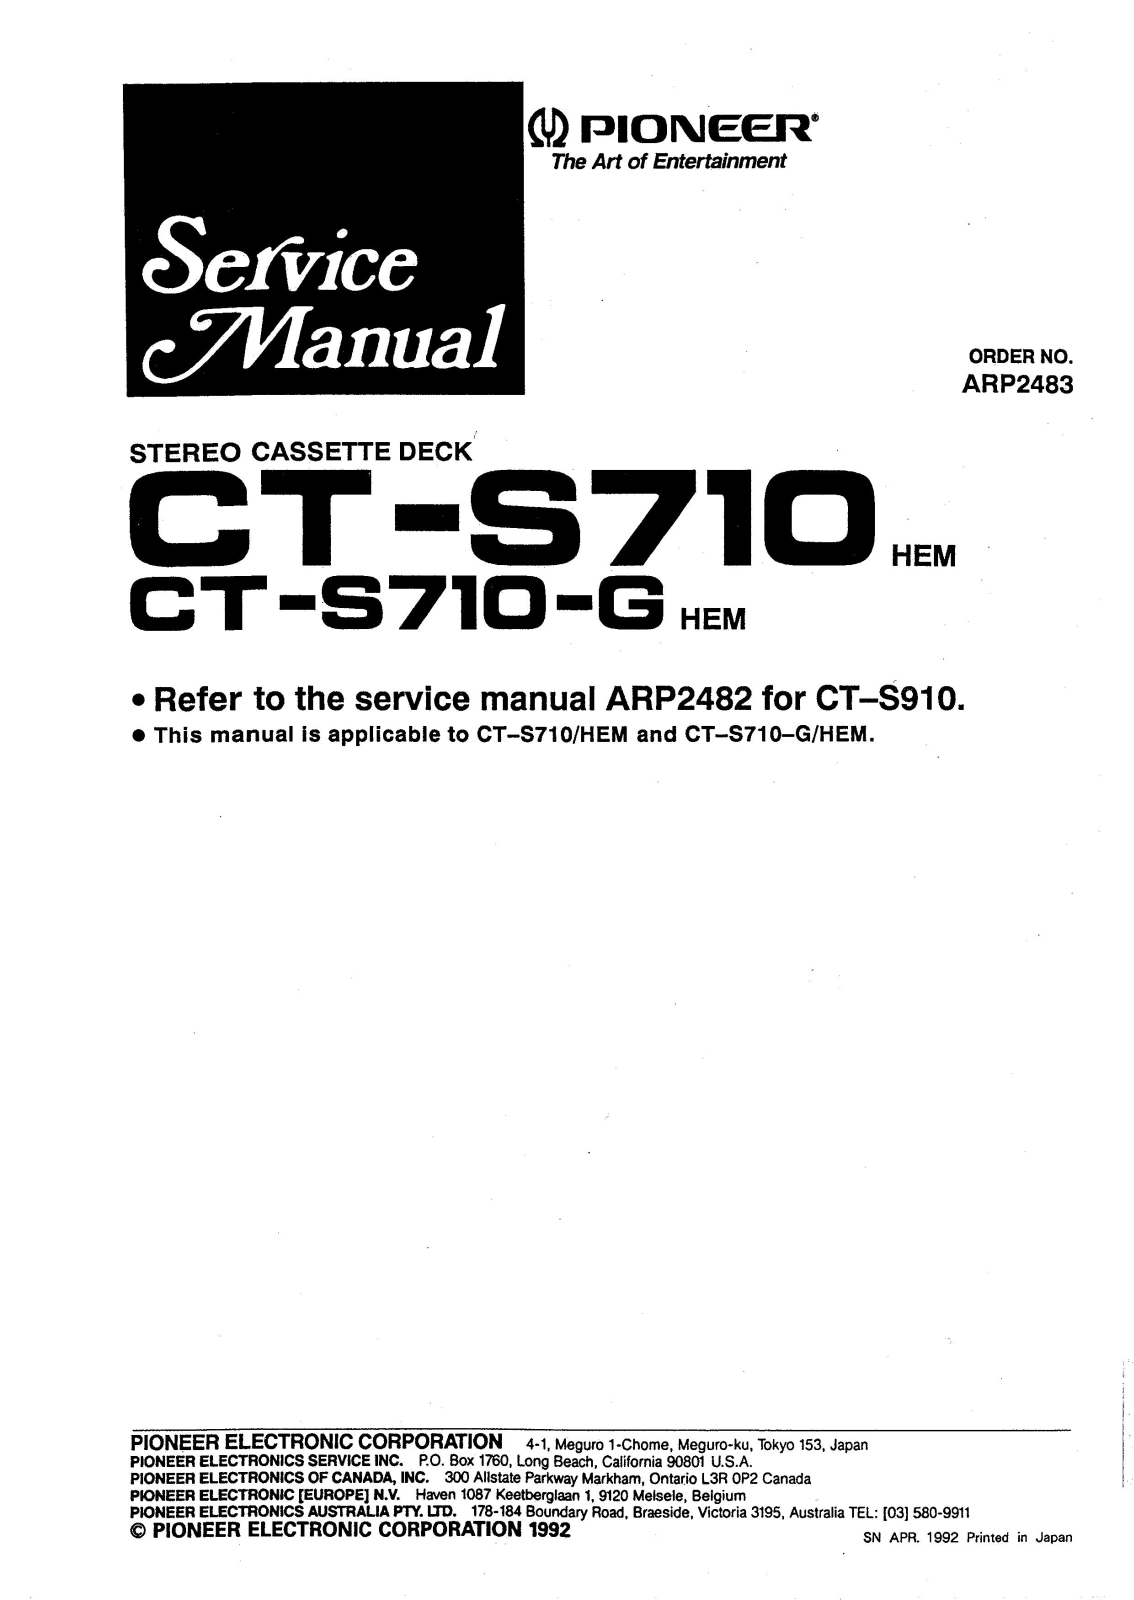 Pioneer CTS-710, CTS-710-G Service manual